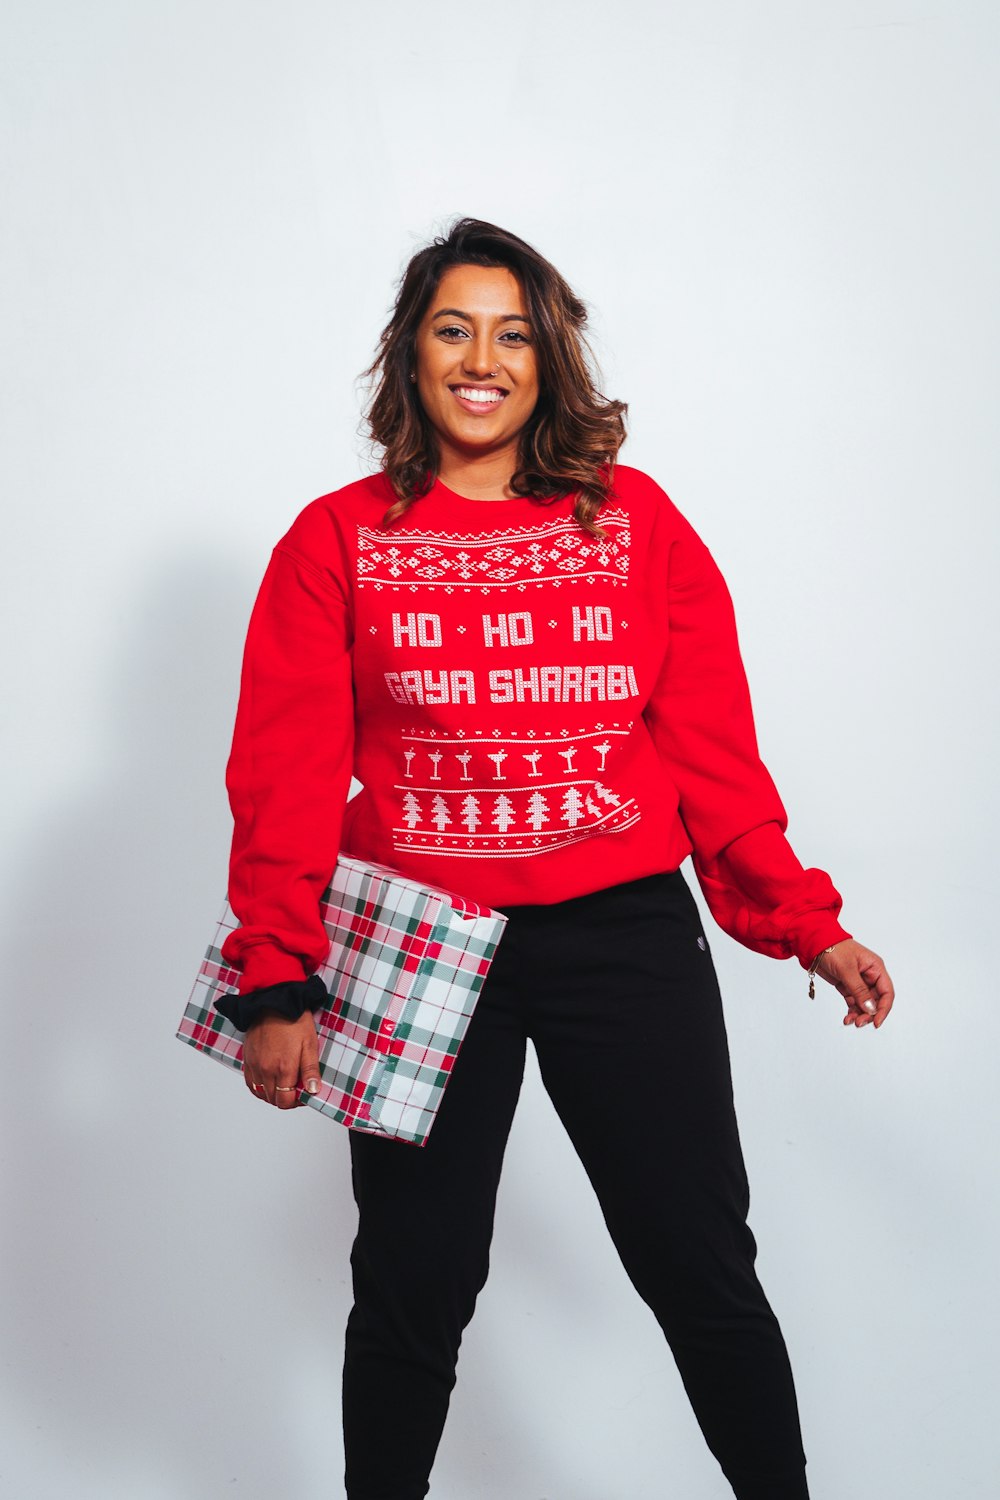 Smiling woman wearing red sweater and black pants photo – Free Sweater  Image on Unsplash